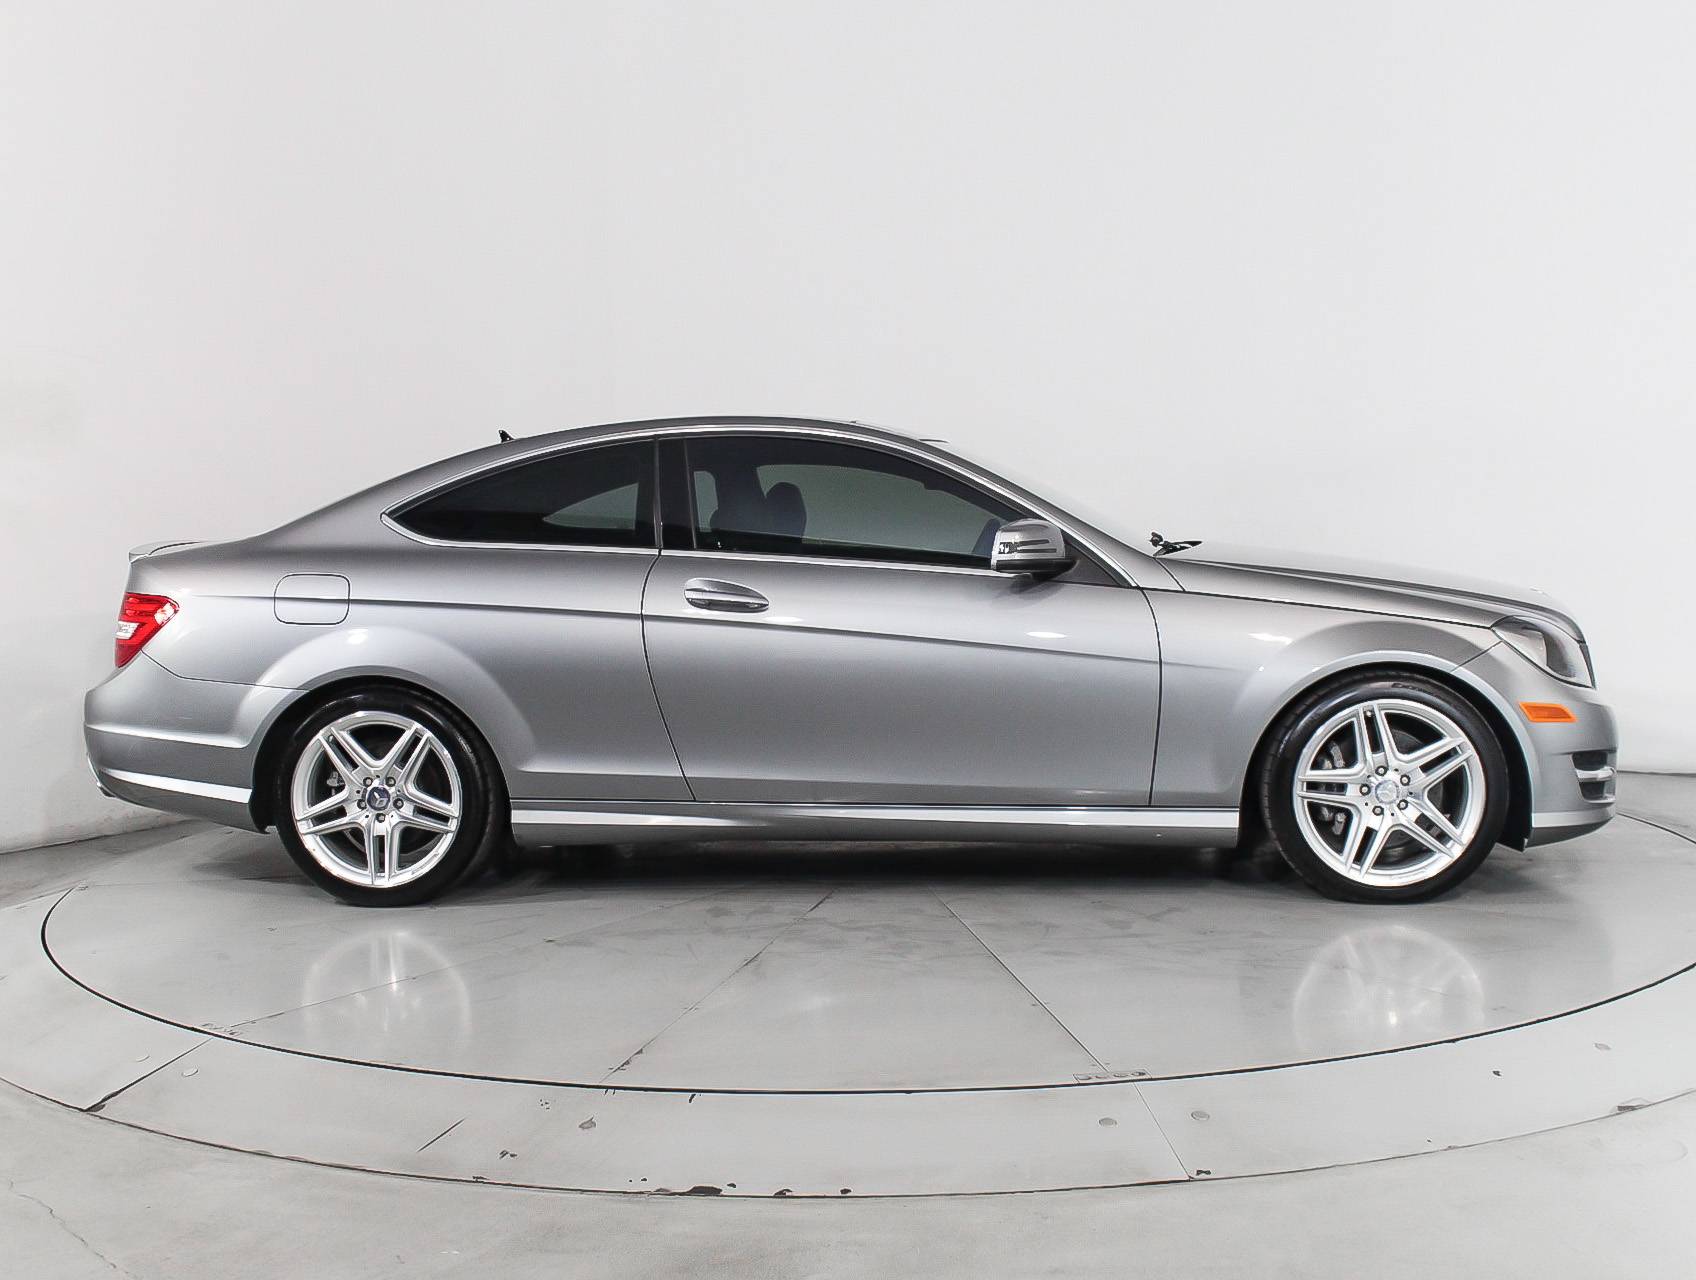 Florida Fine Cars - Used MERCEDES-BENZ C CLASS 2013 HOLLYWOOD C350